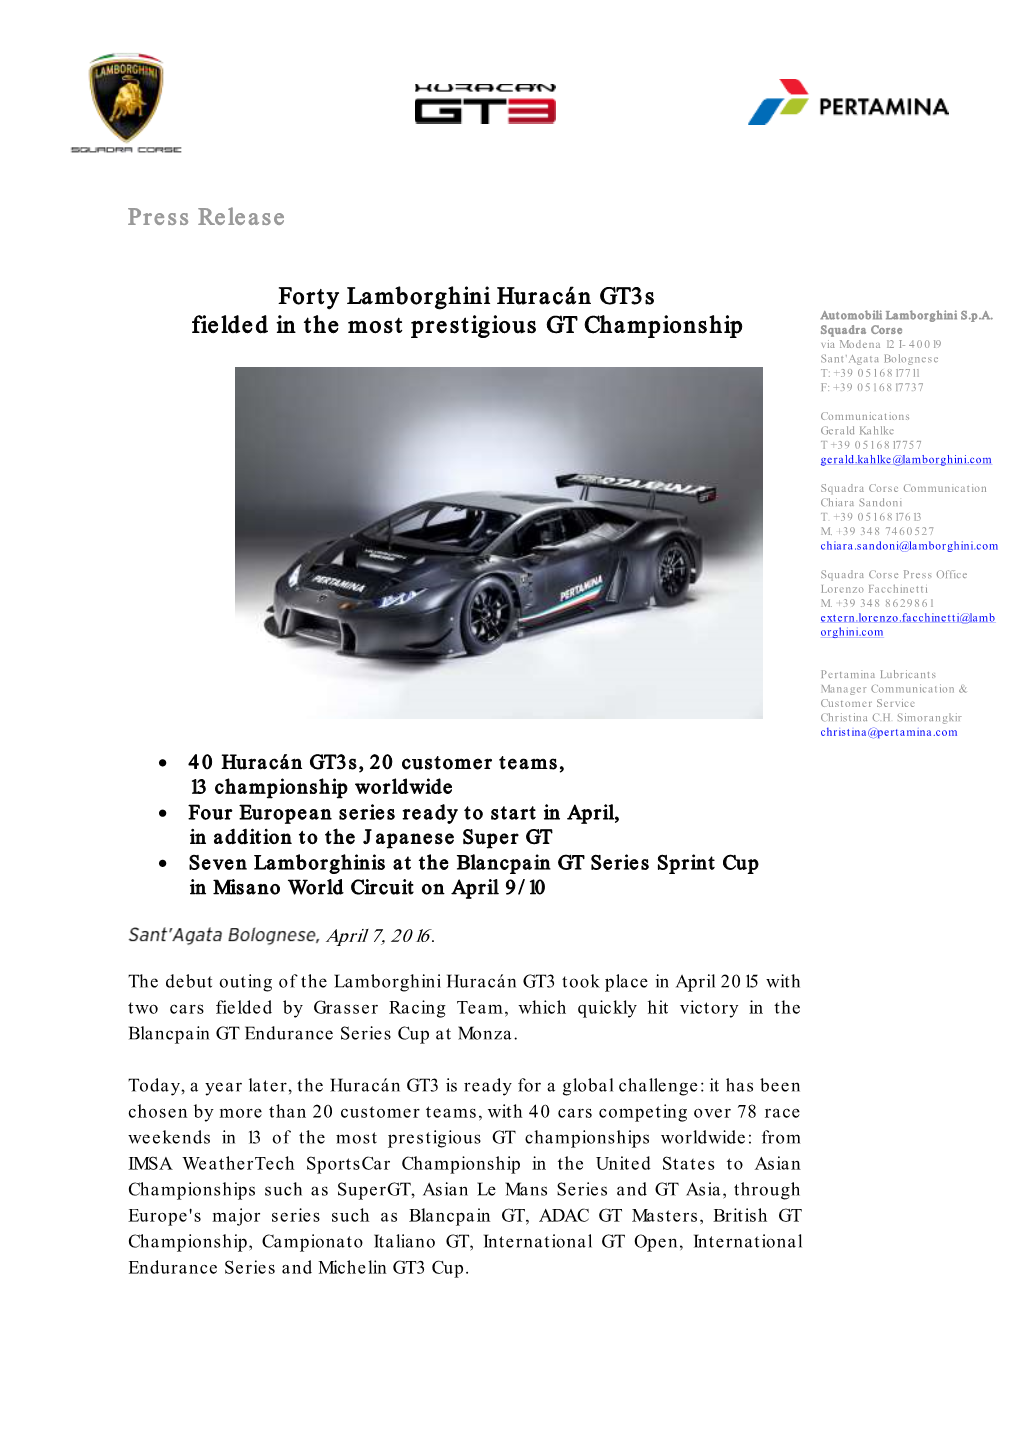 Press Release Forty Lamborghini Huracán Gt3s Fielded in the Most